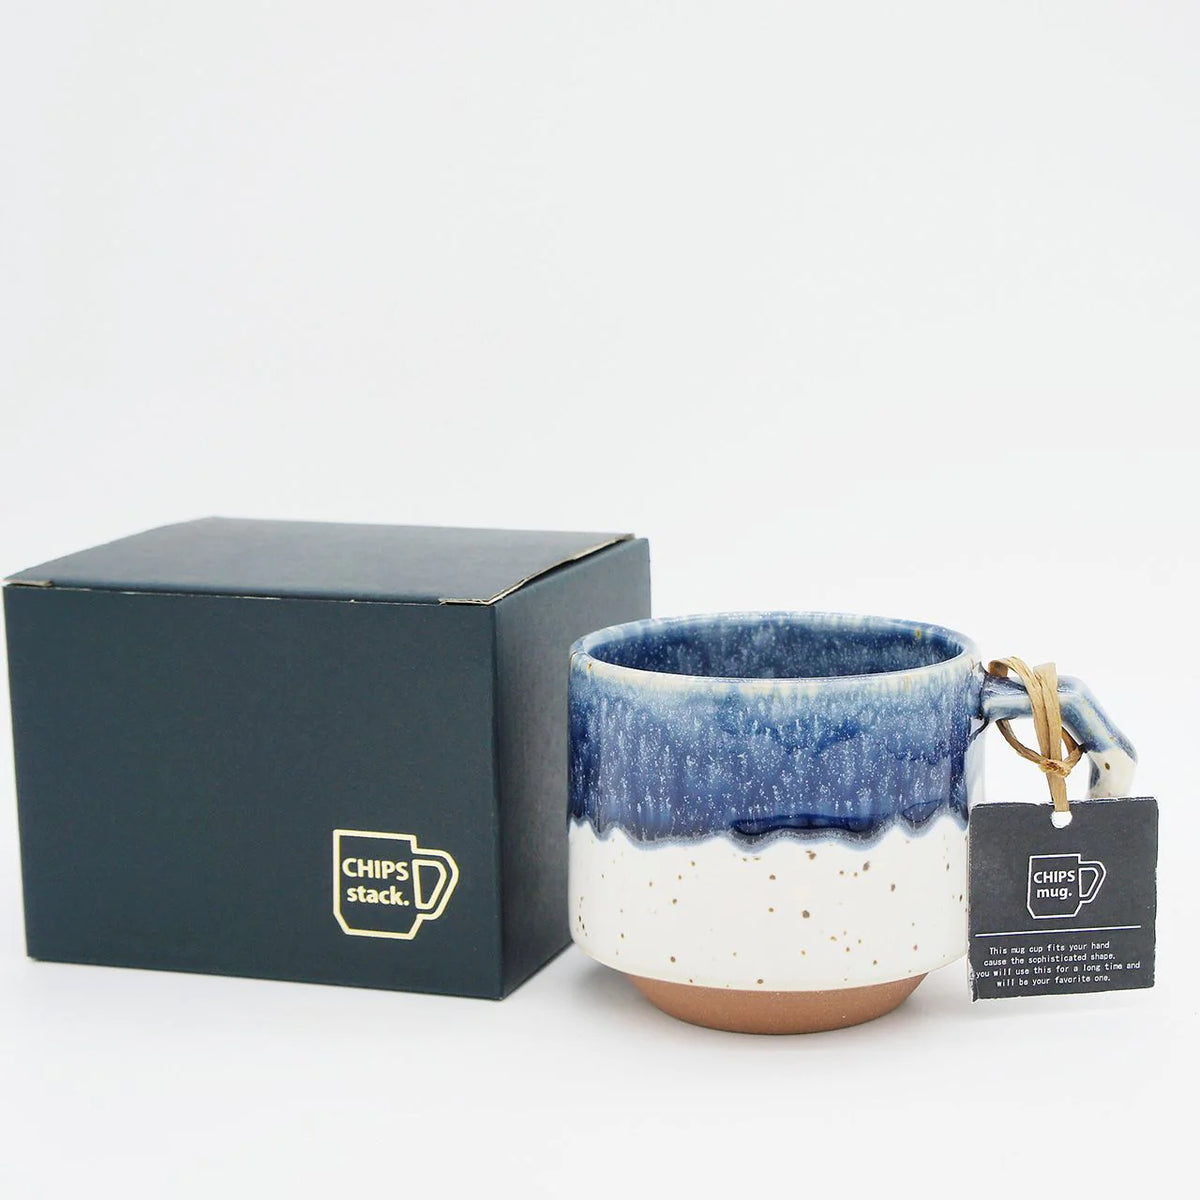 A Stacking Mug - Navy/White with aesthetic appeal, presented in a box with a tag, manufactured by CHIPS Inc.